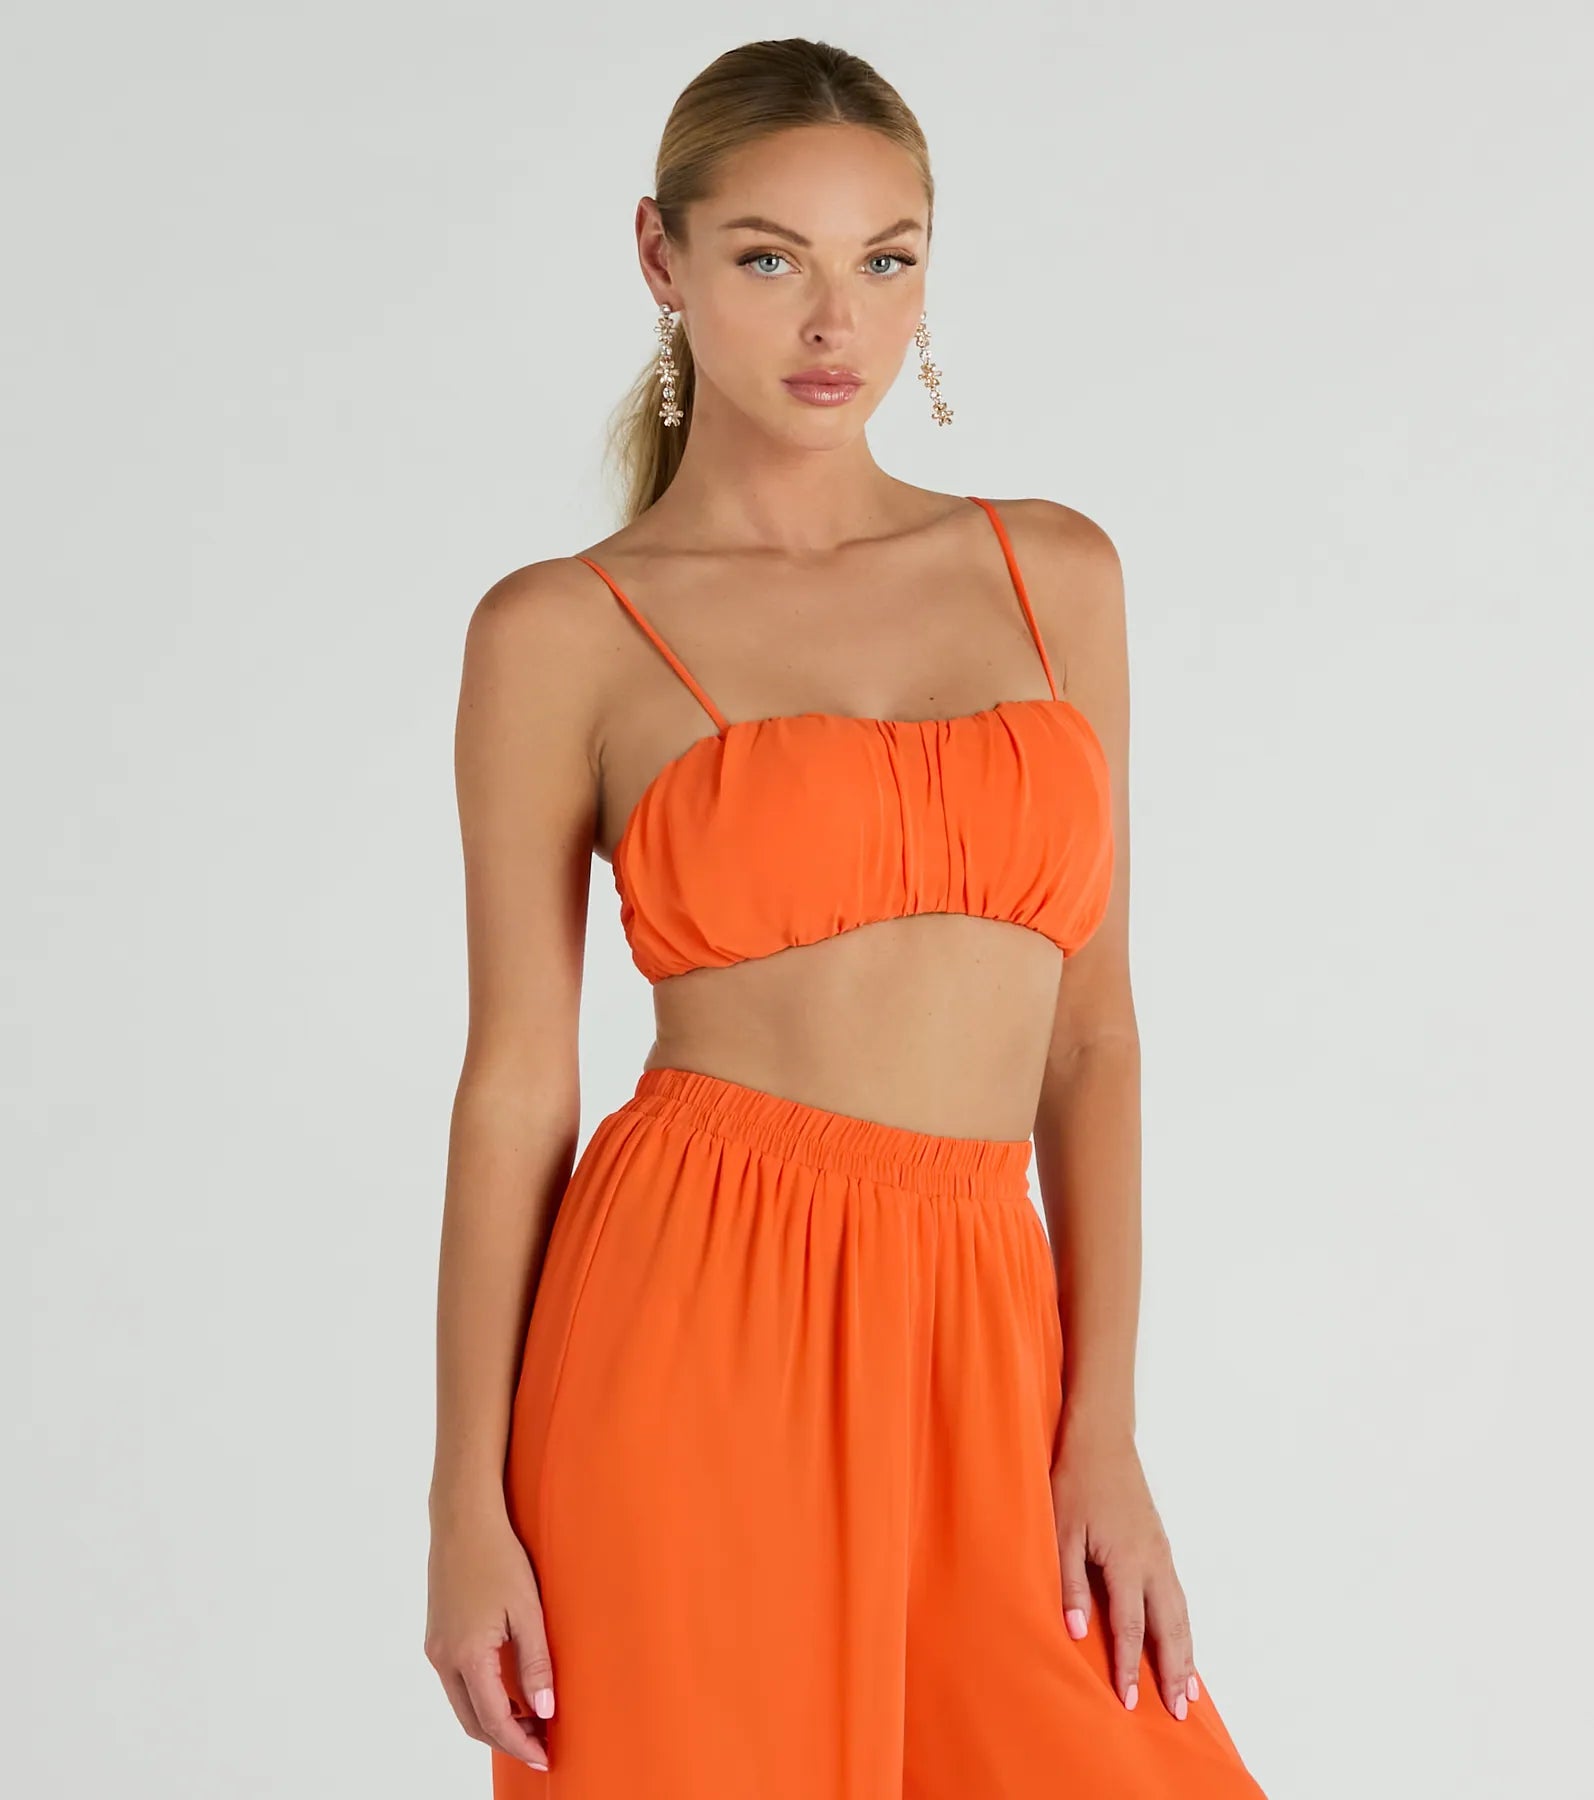 Gorgeous Allure Ruched Chiffon Bra Top